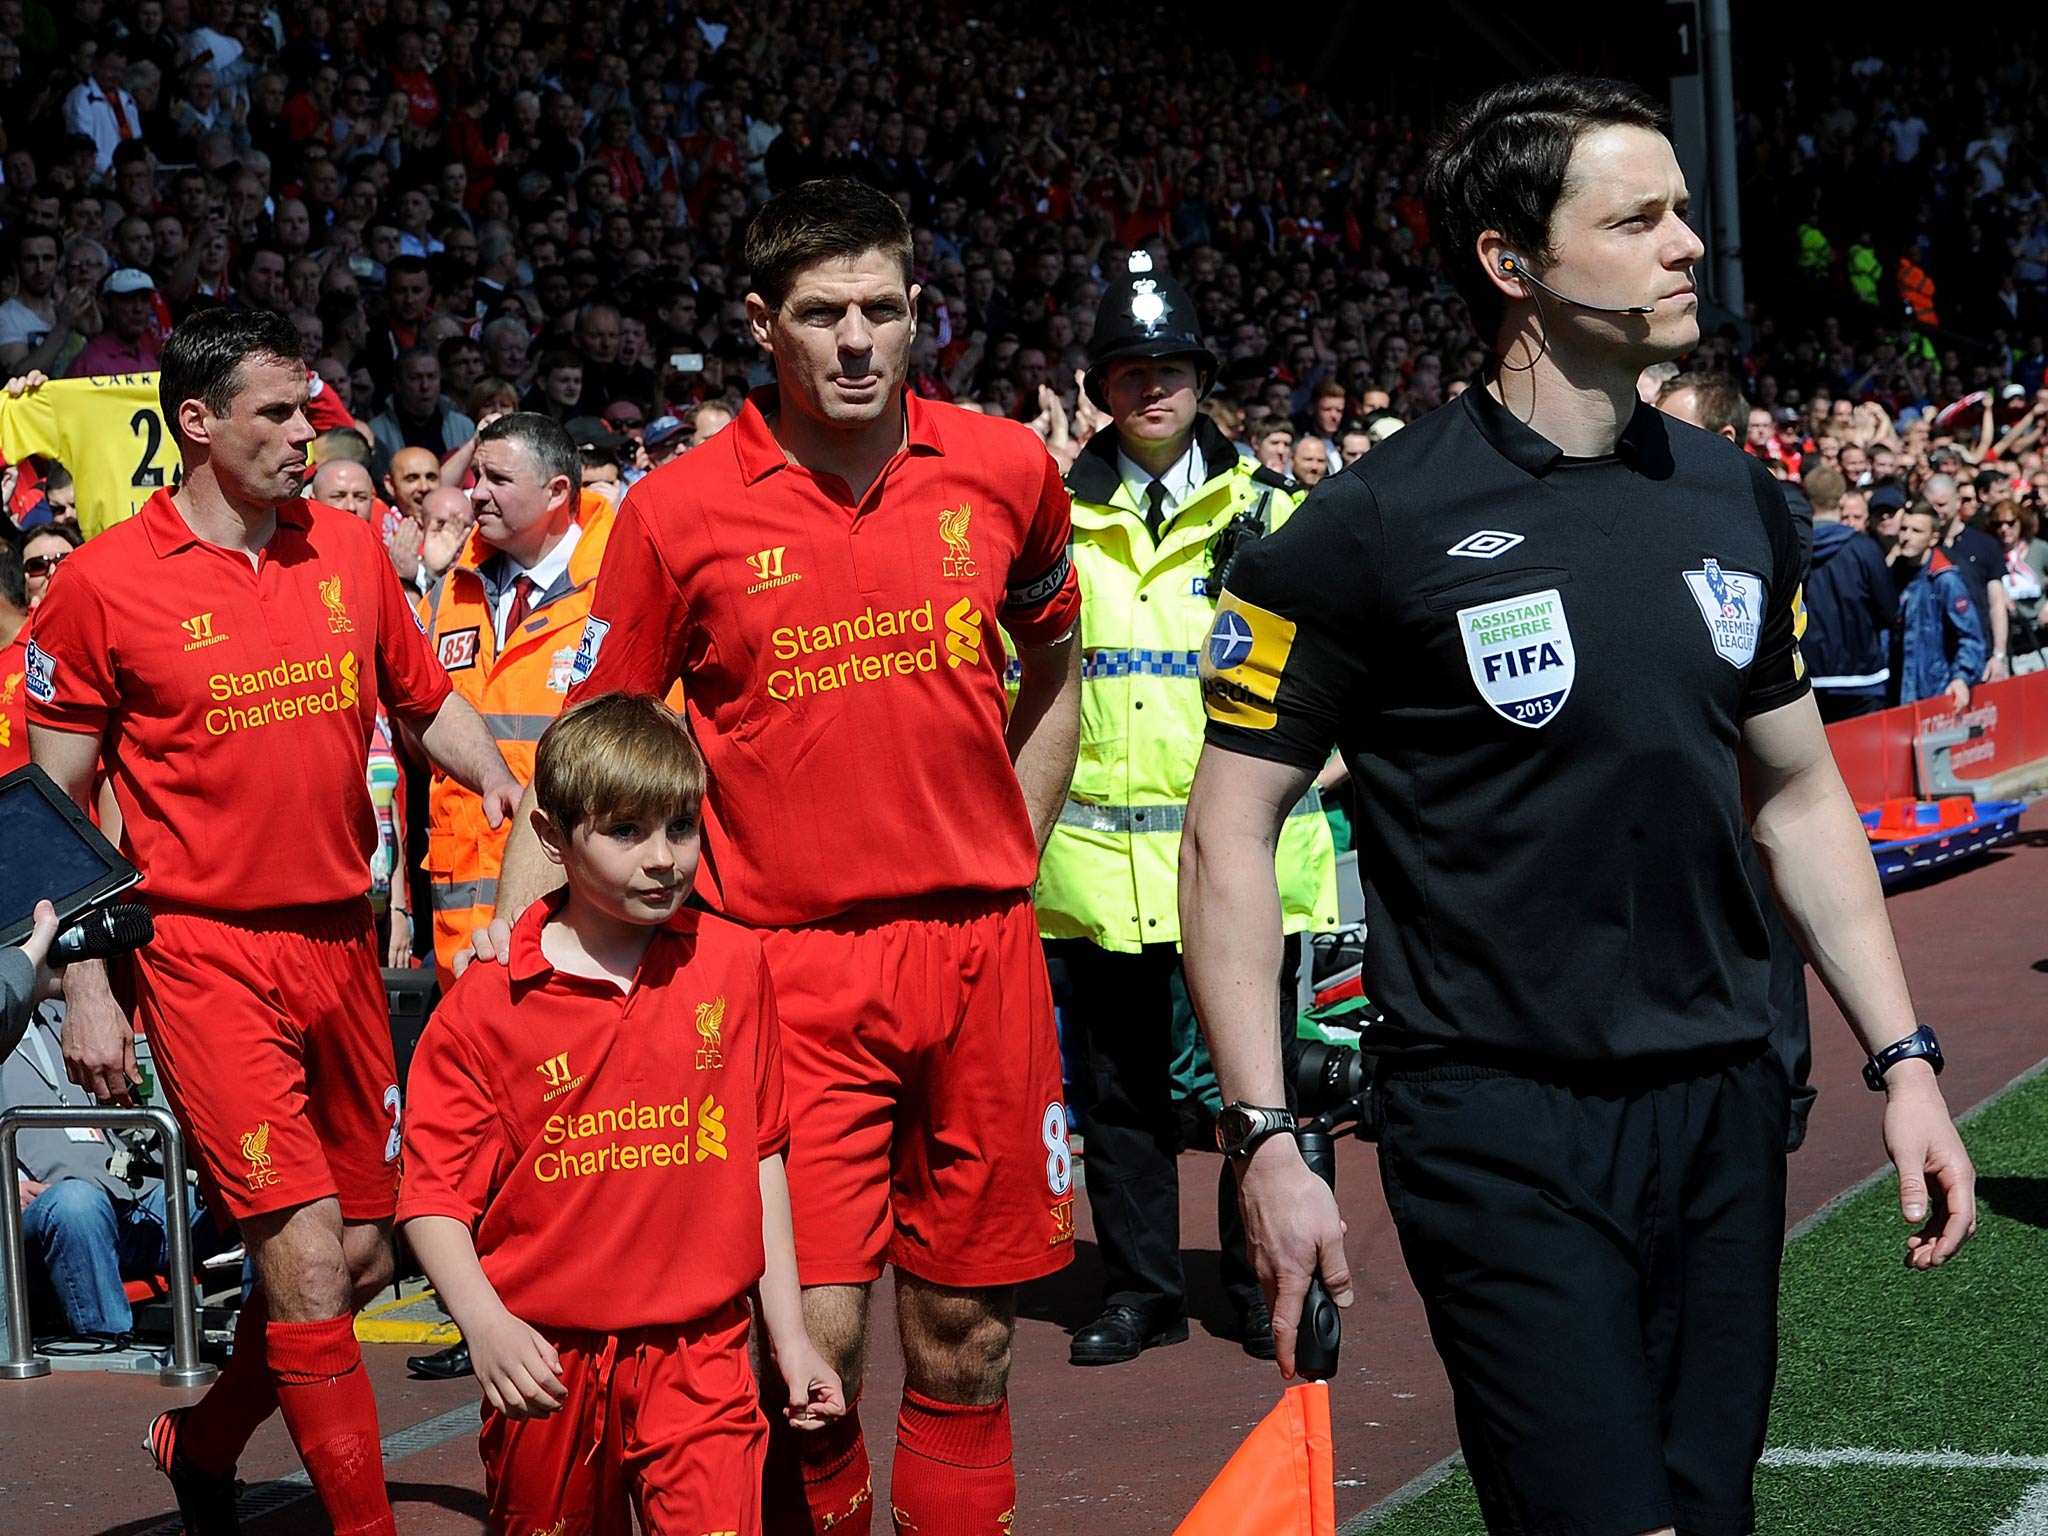 Jamie Carragher and Steven Gerrard pictured for Liverpool in their match against Everton